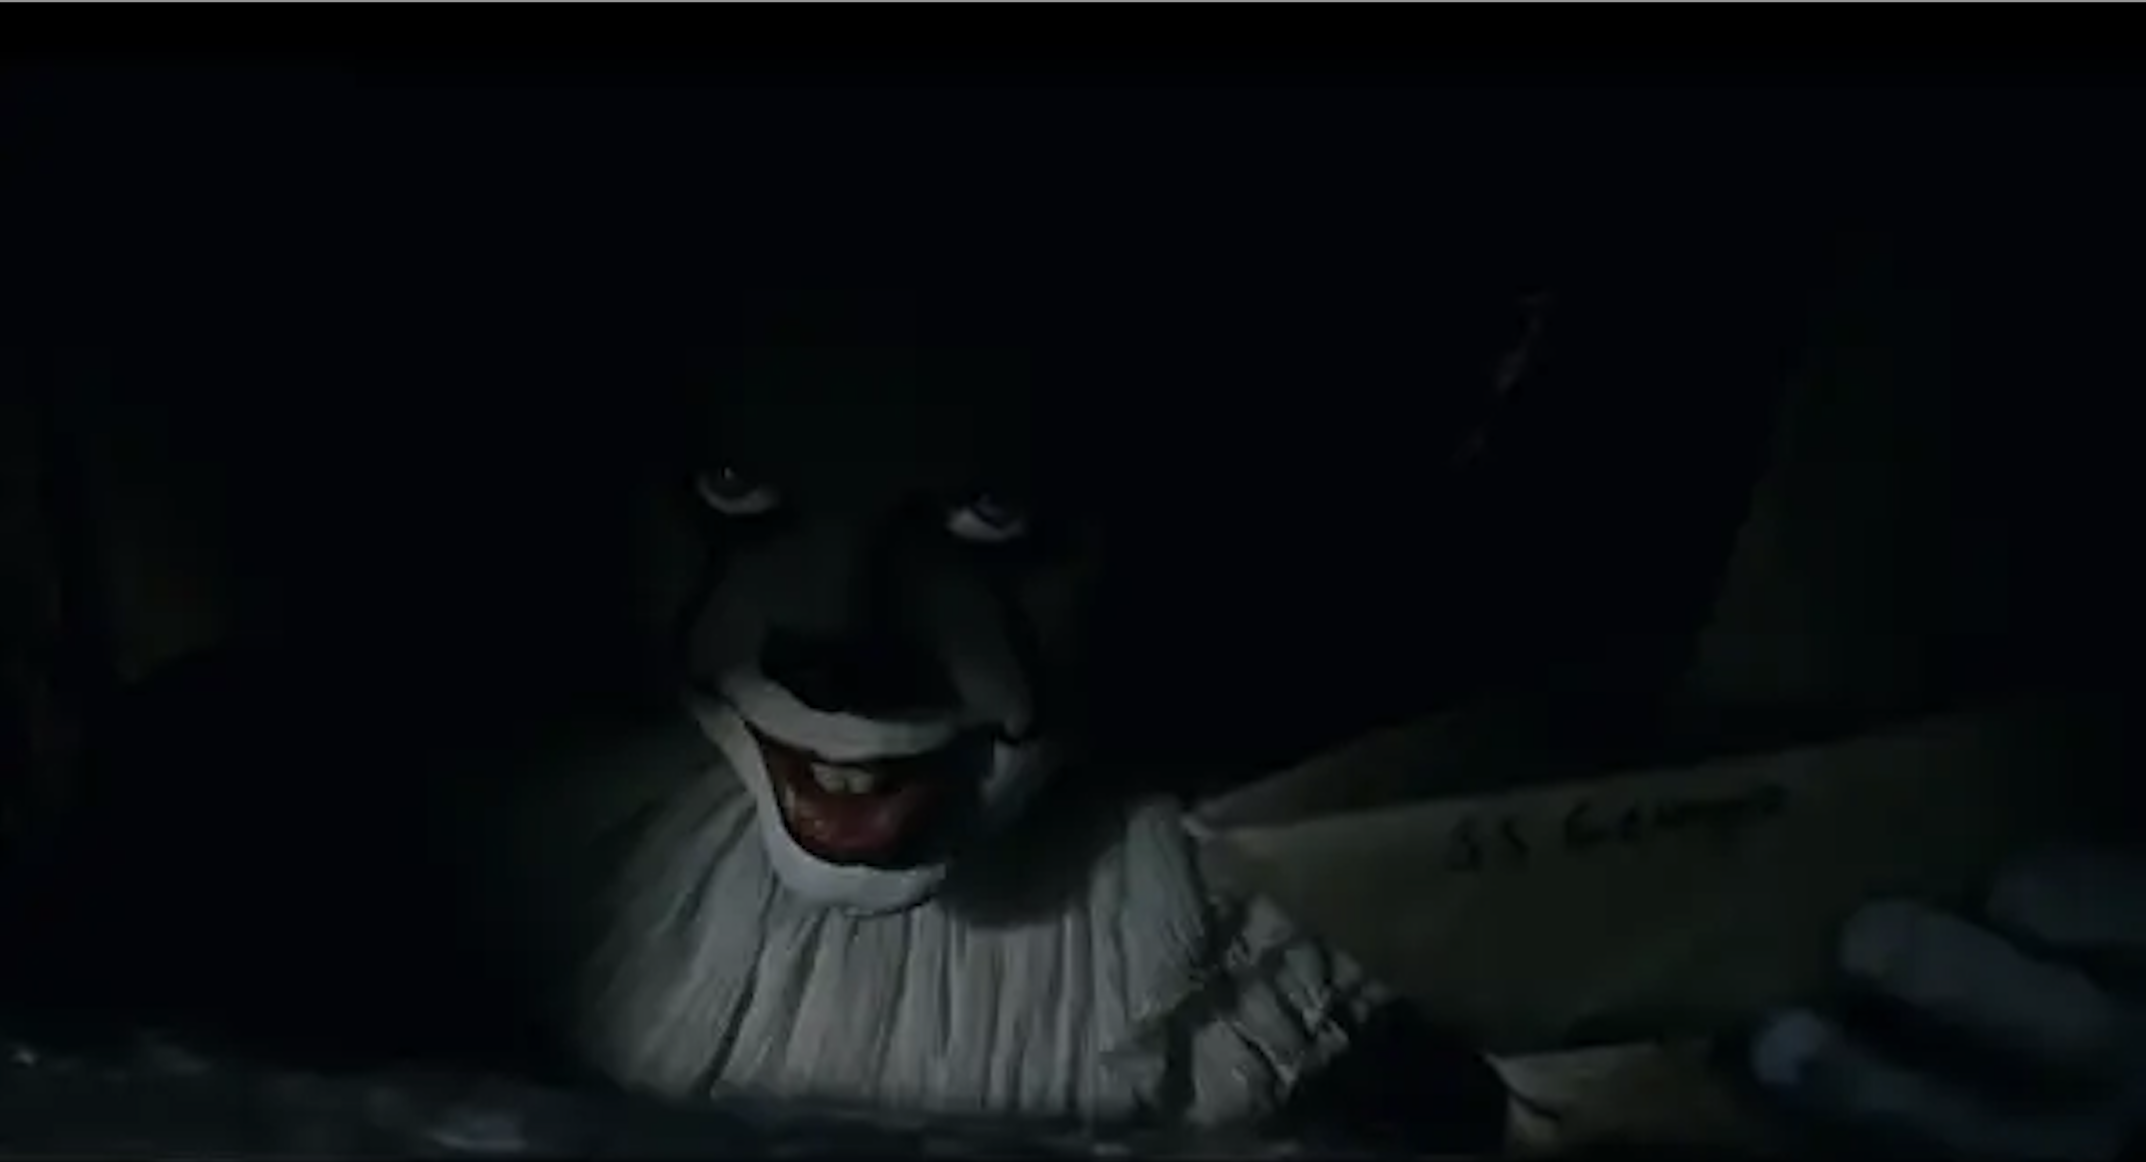 A really scary clown smiling in the dark